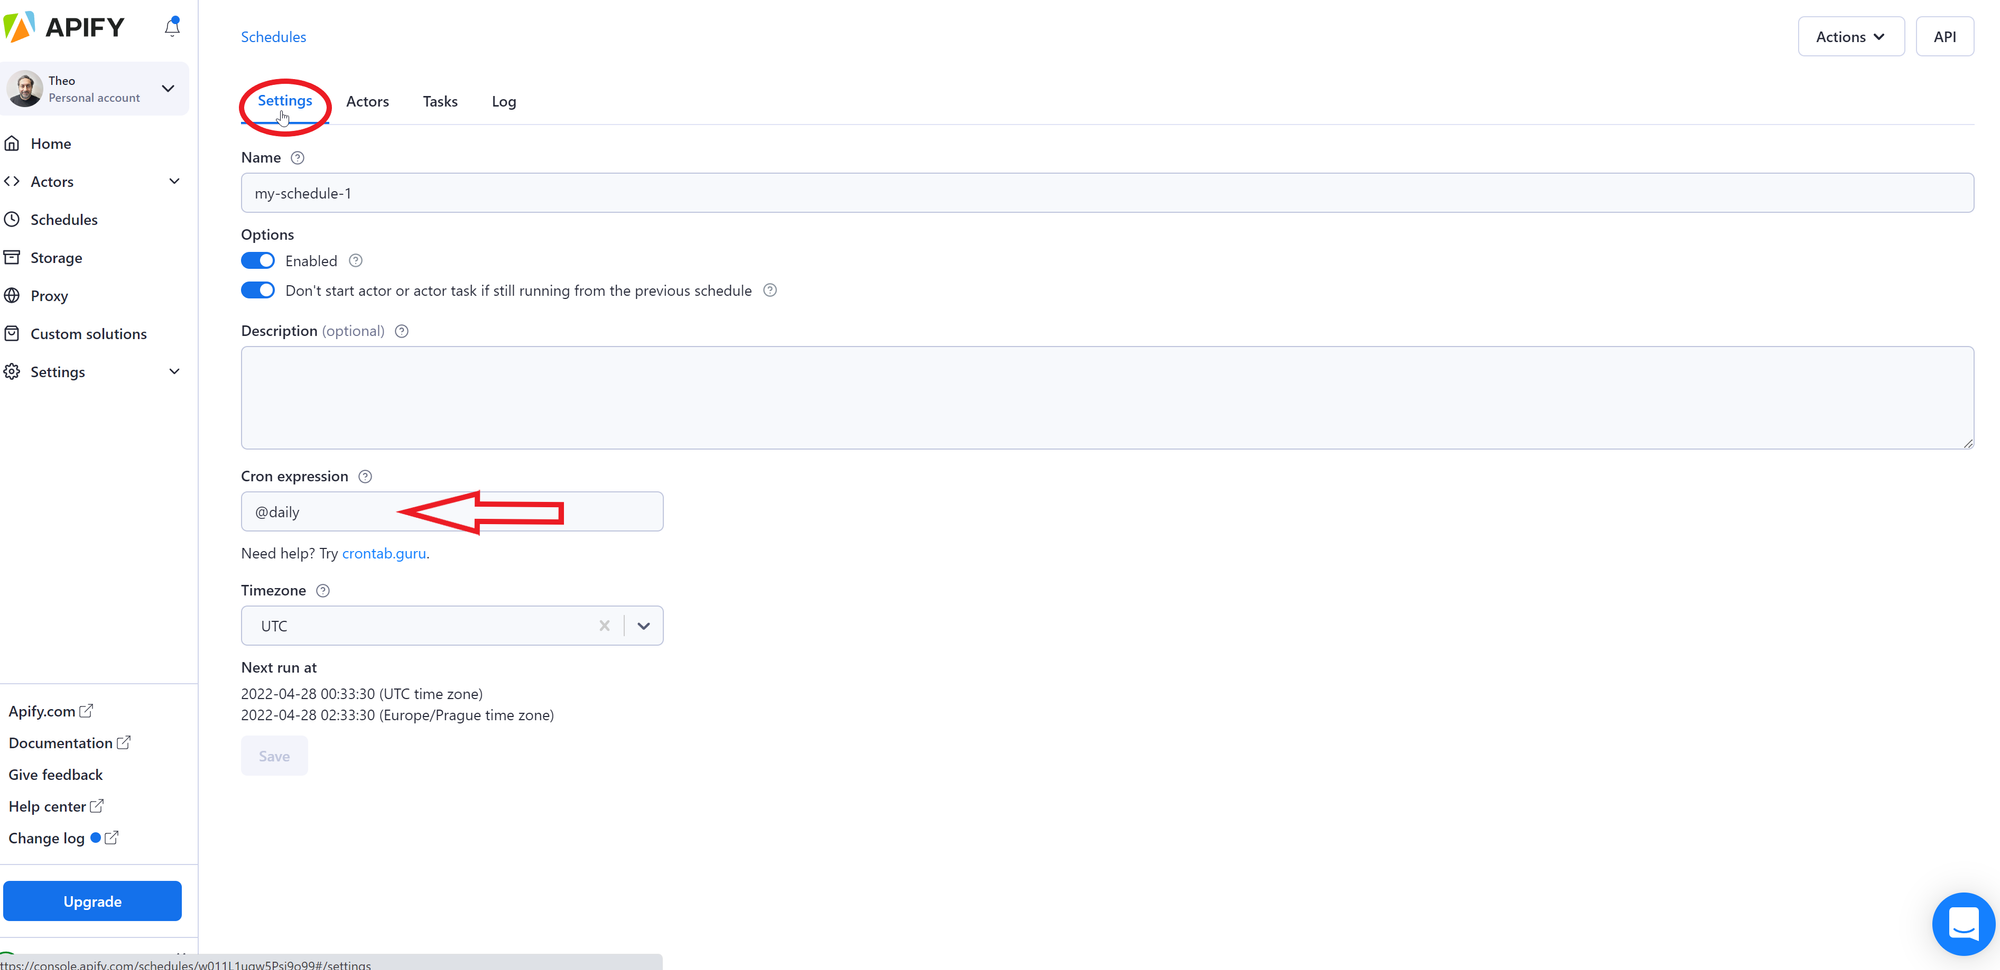 Configuring scheduling options on Apify platform.